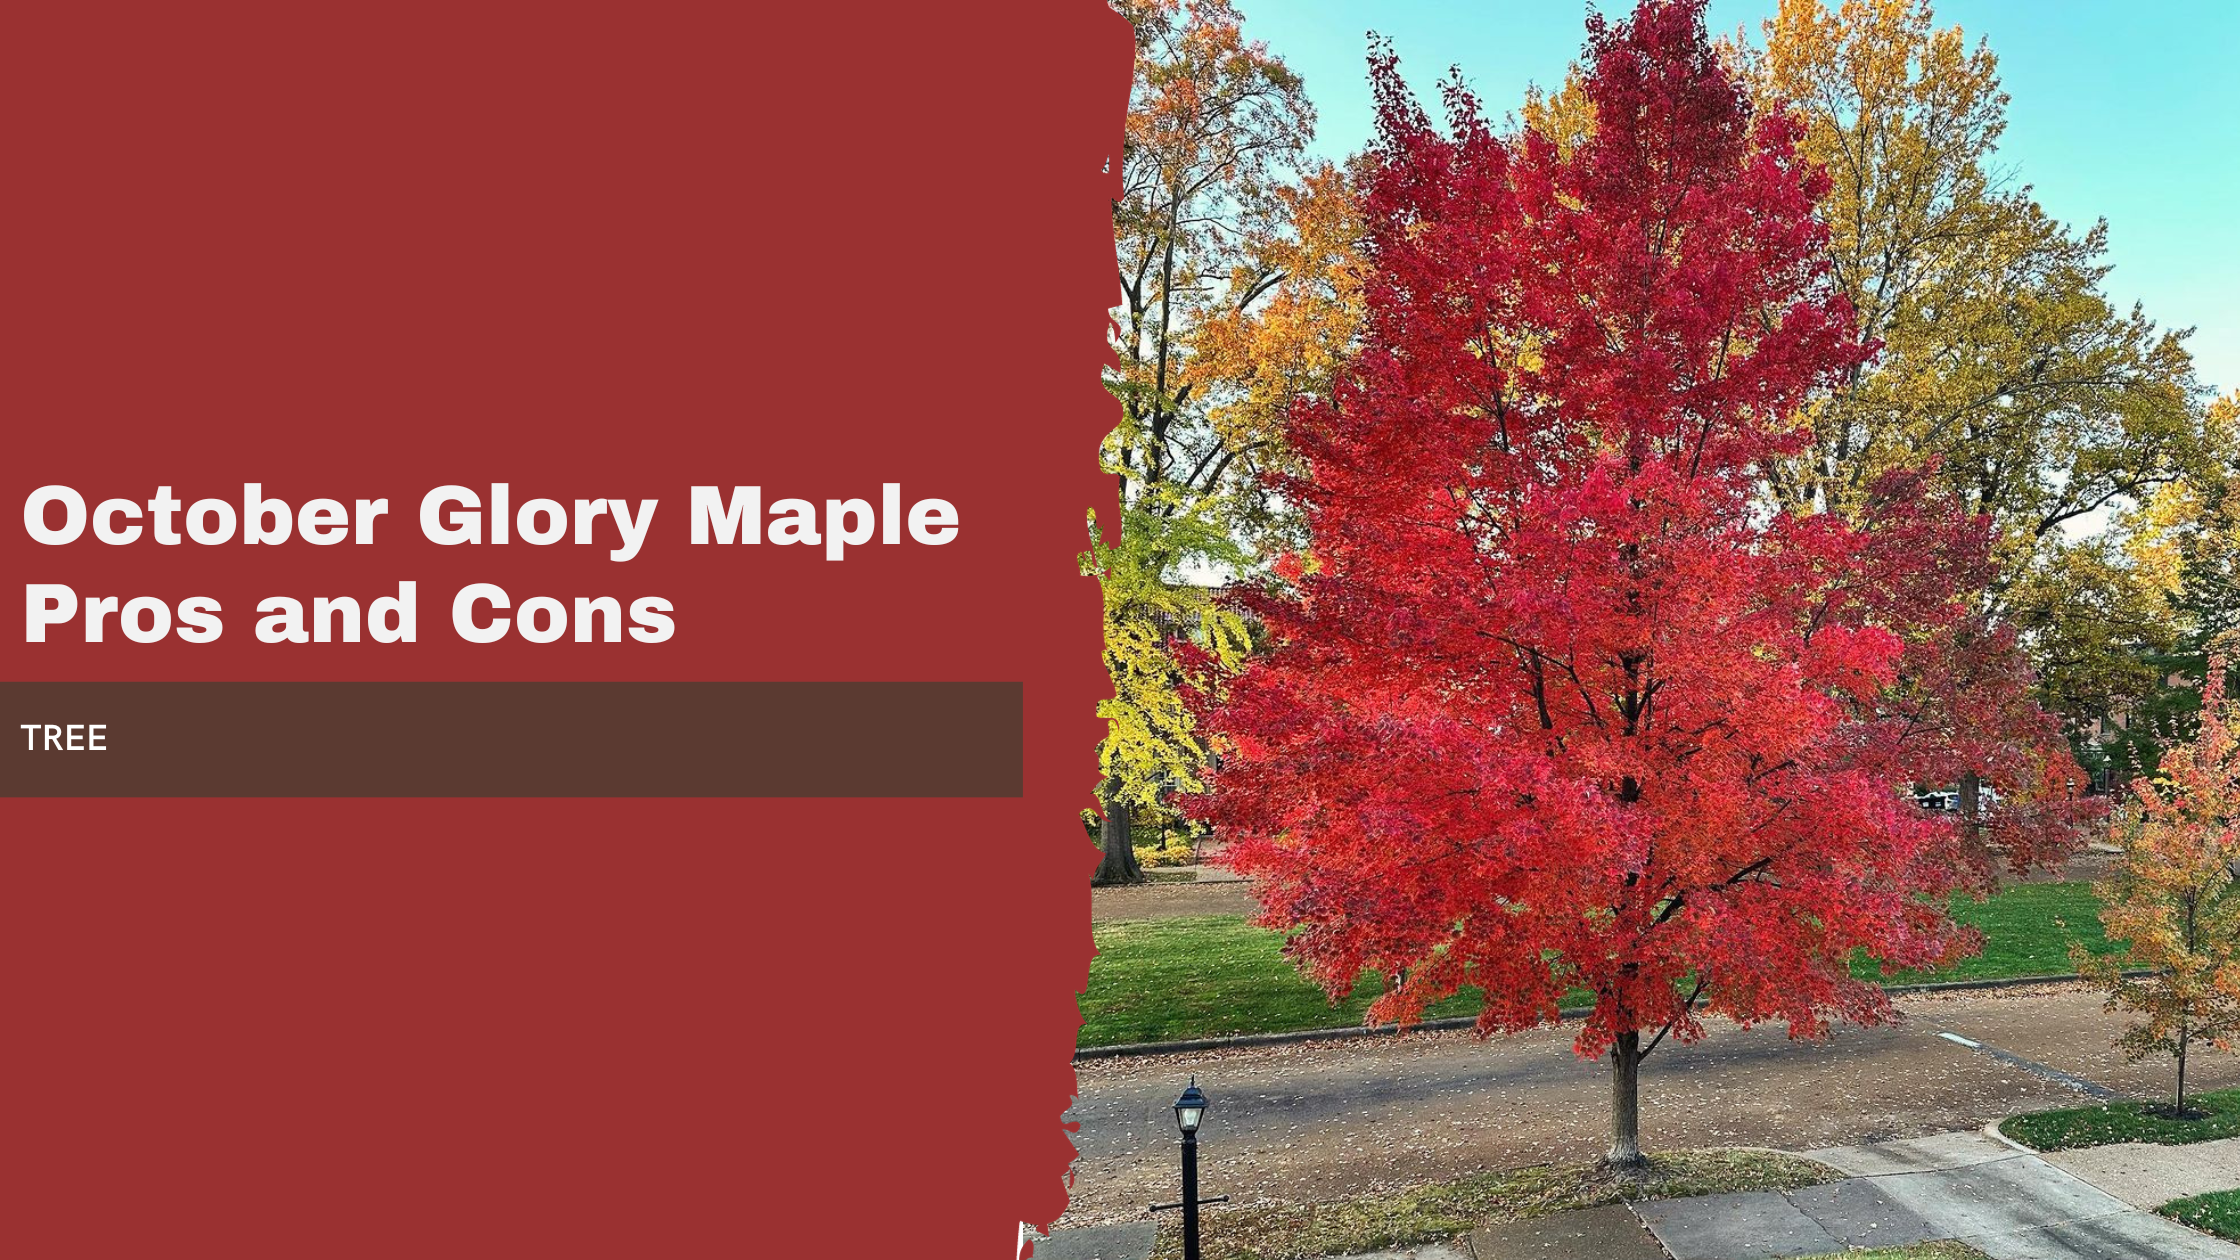 October Glory Maple: Pros and Cons